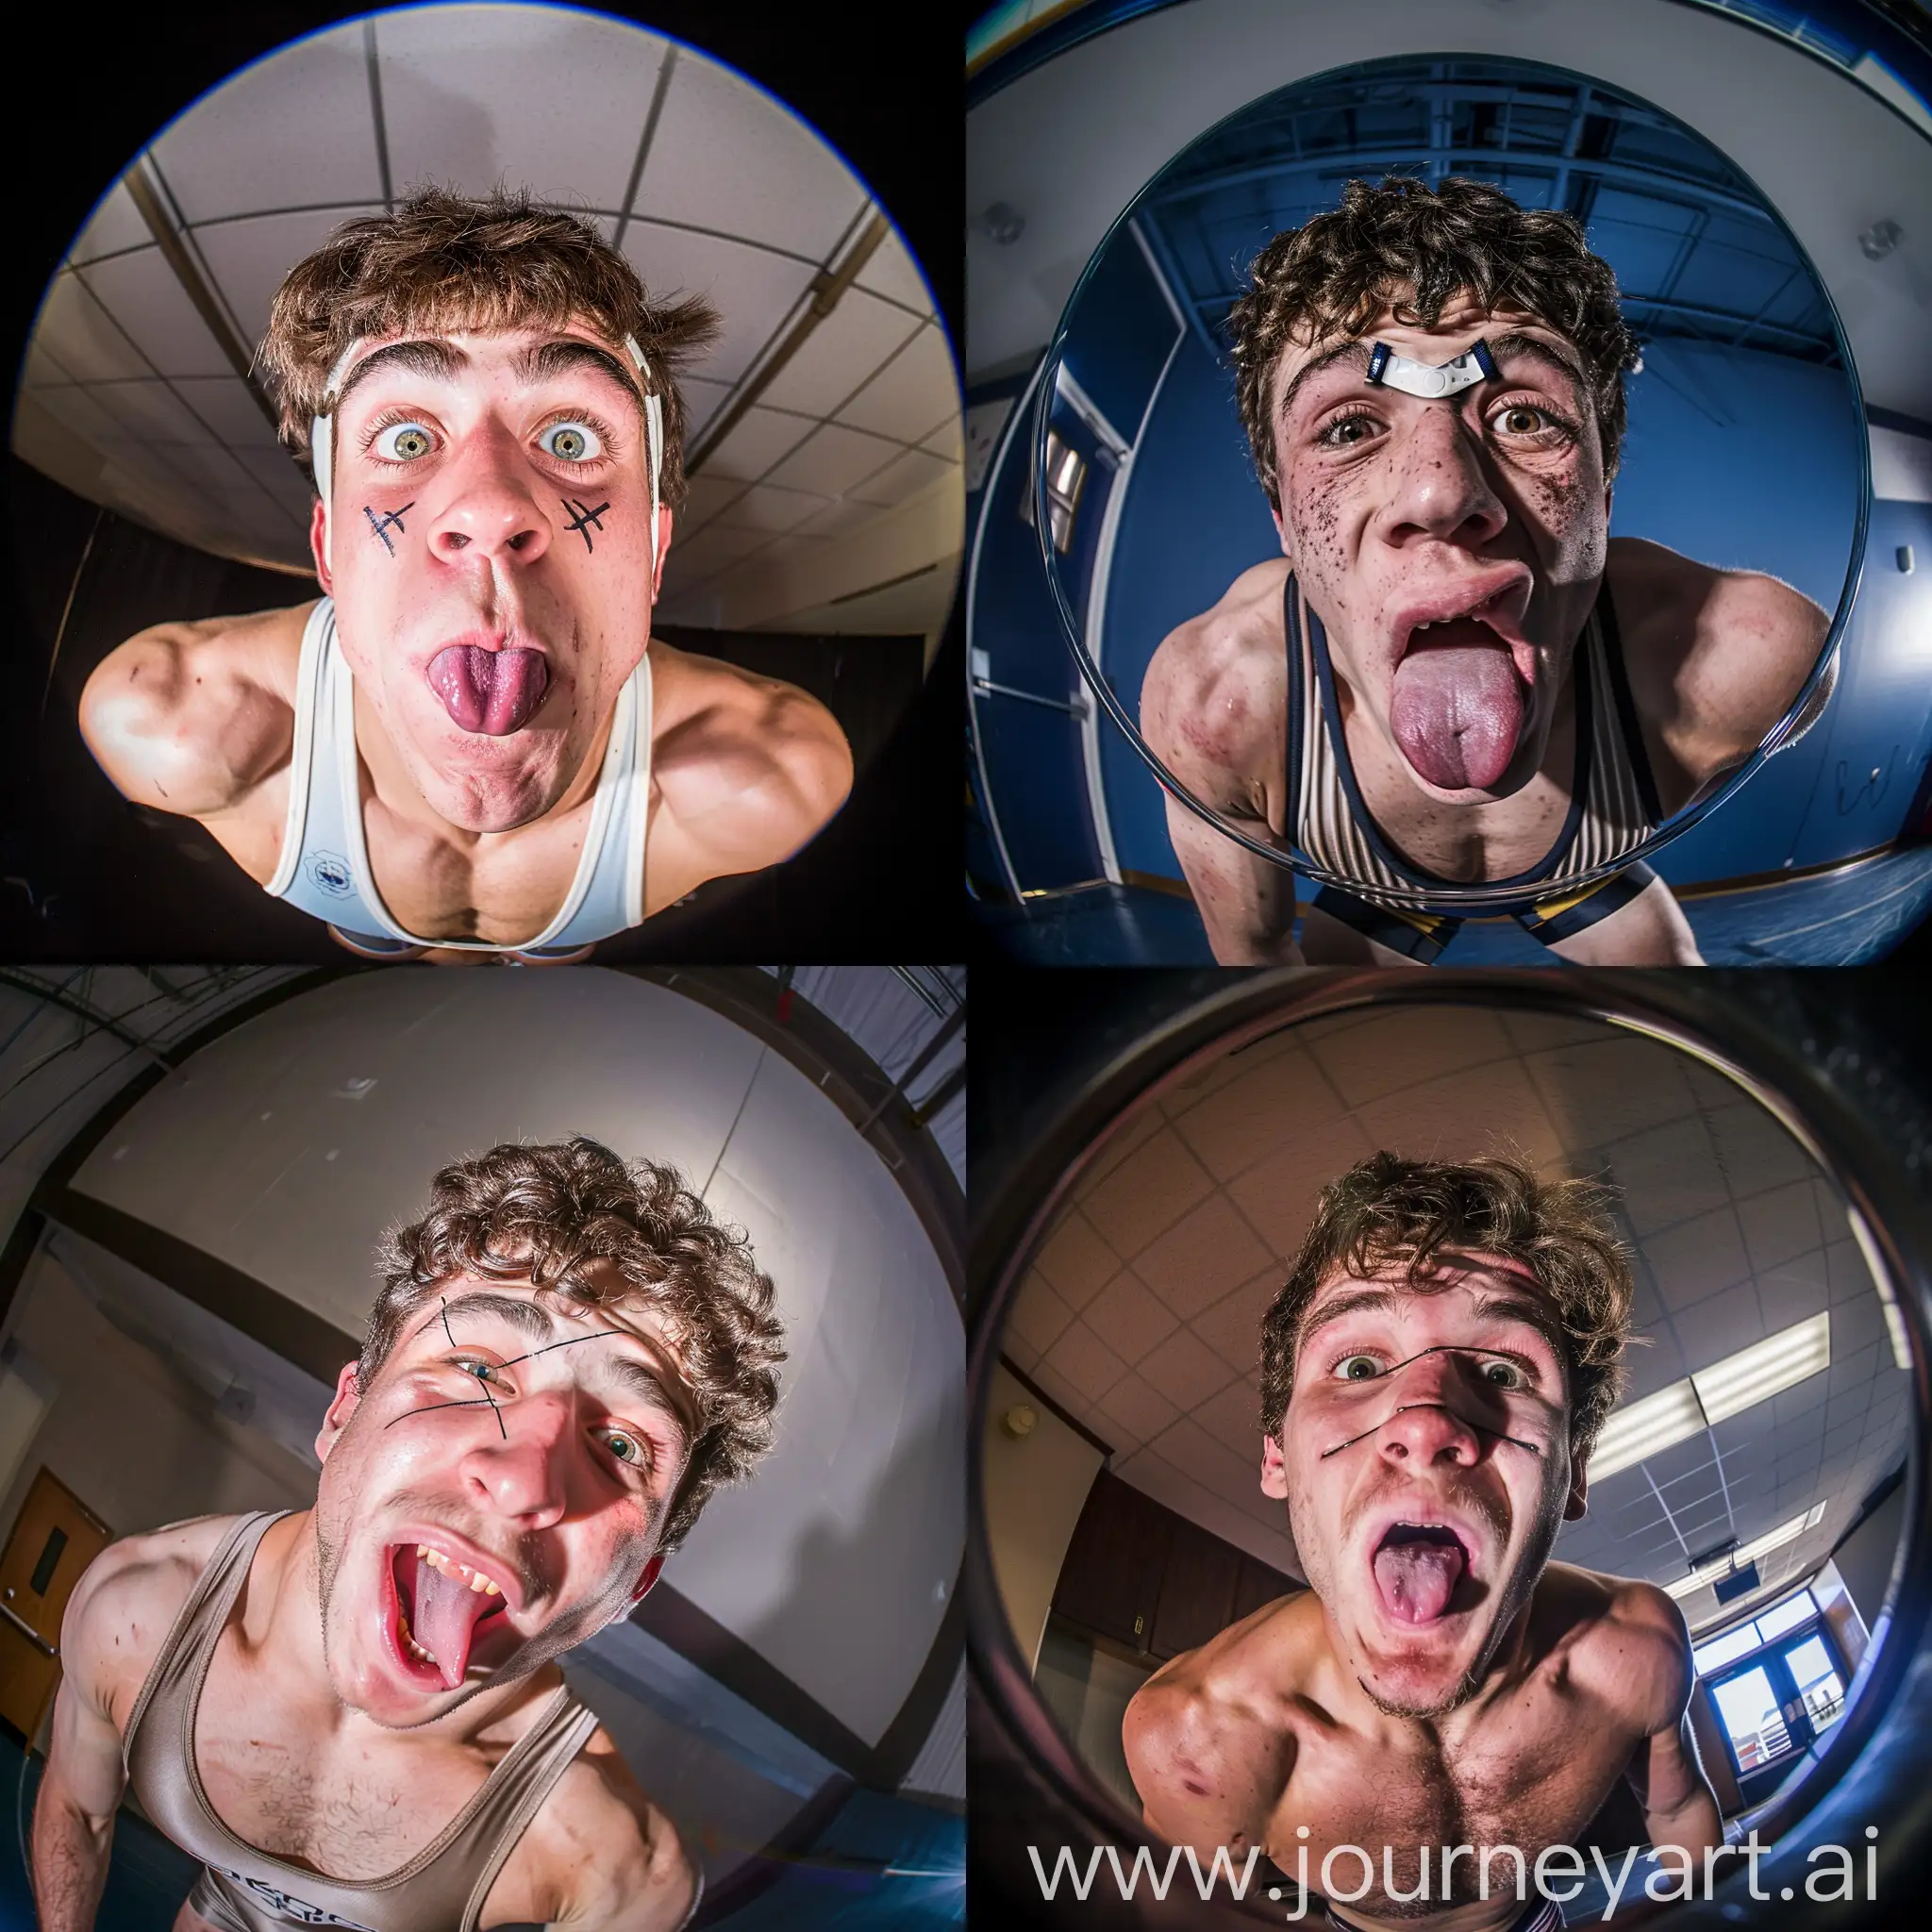 hd fisheye photograph selfie of a college 18 year old male wrestler athlete, making a silly face, crossing his eyes and sticking out his tongue